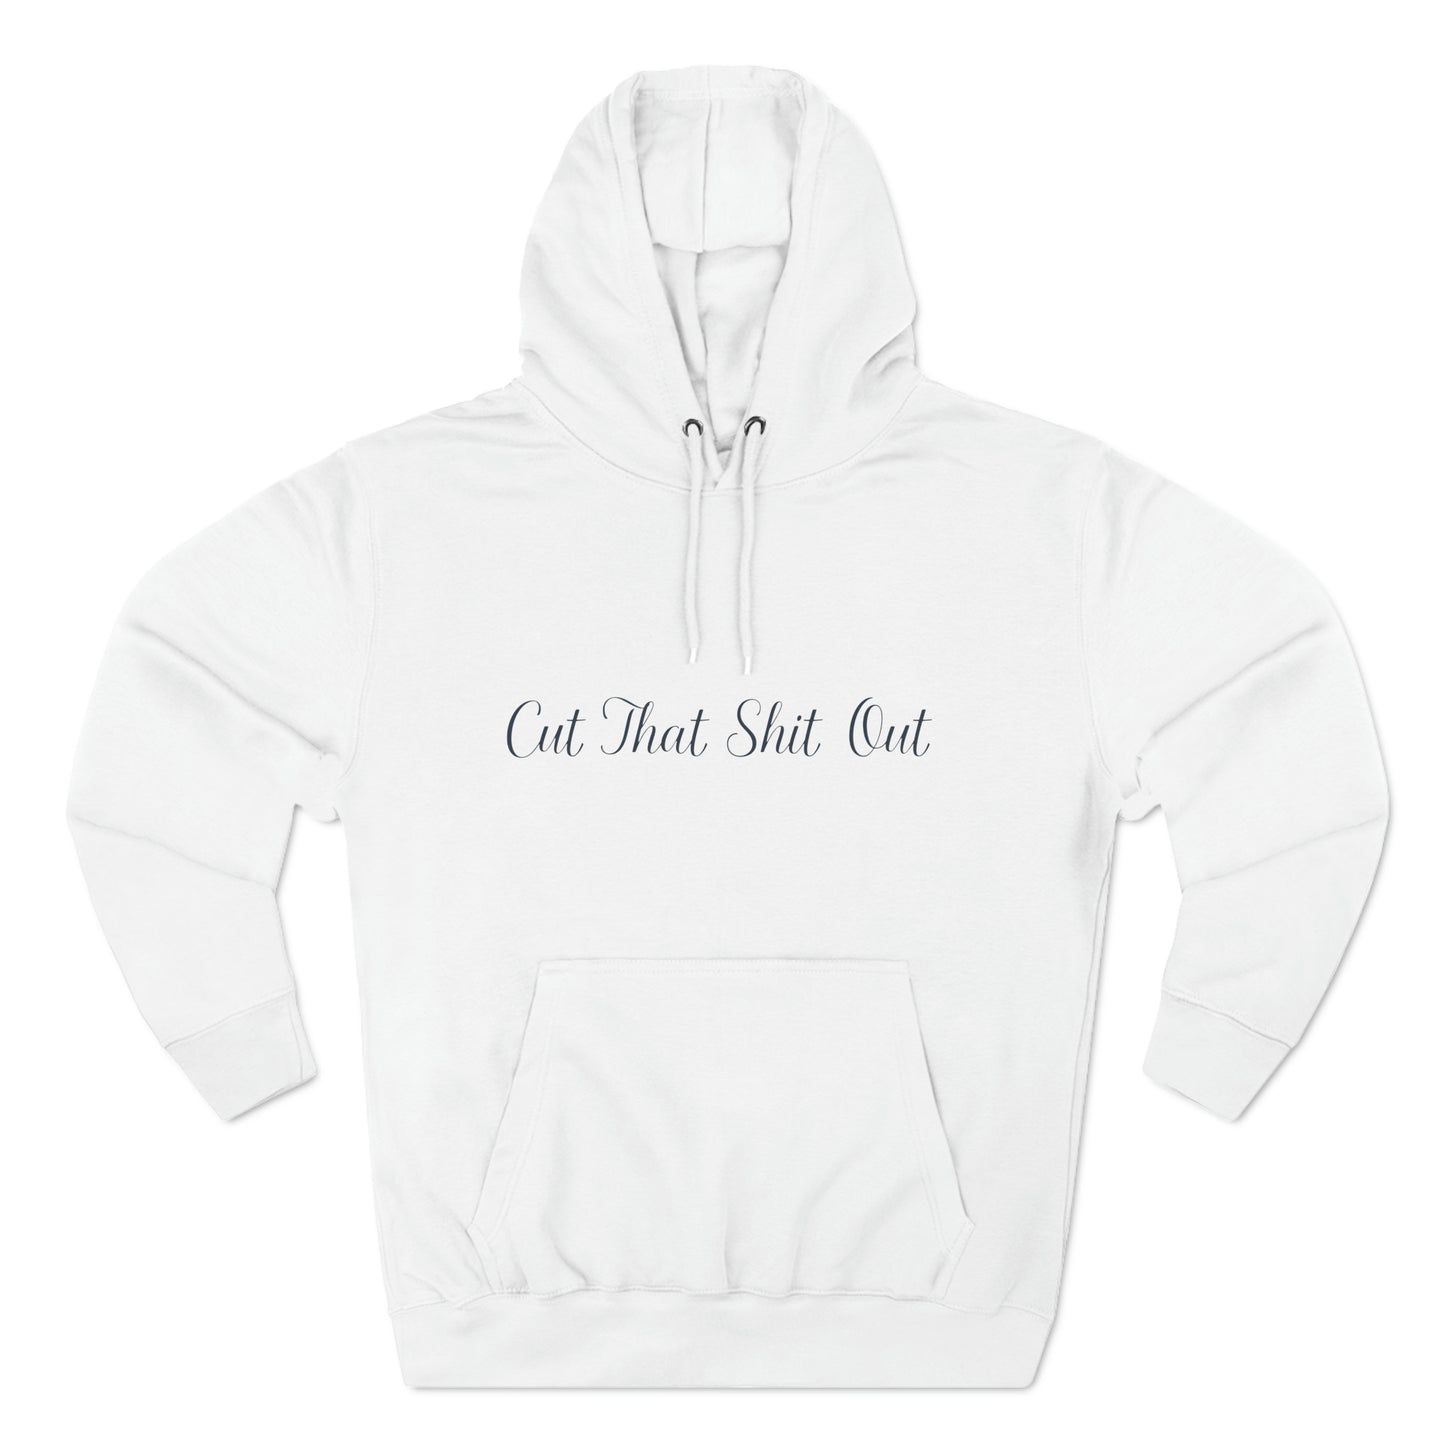 Cut That Shit Out Hoodie - Unisex